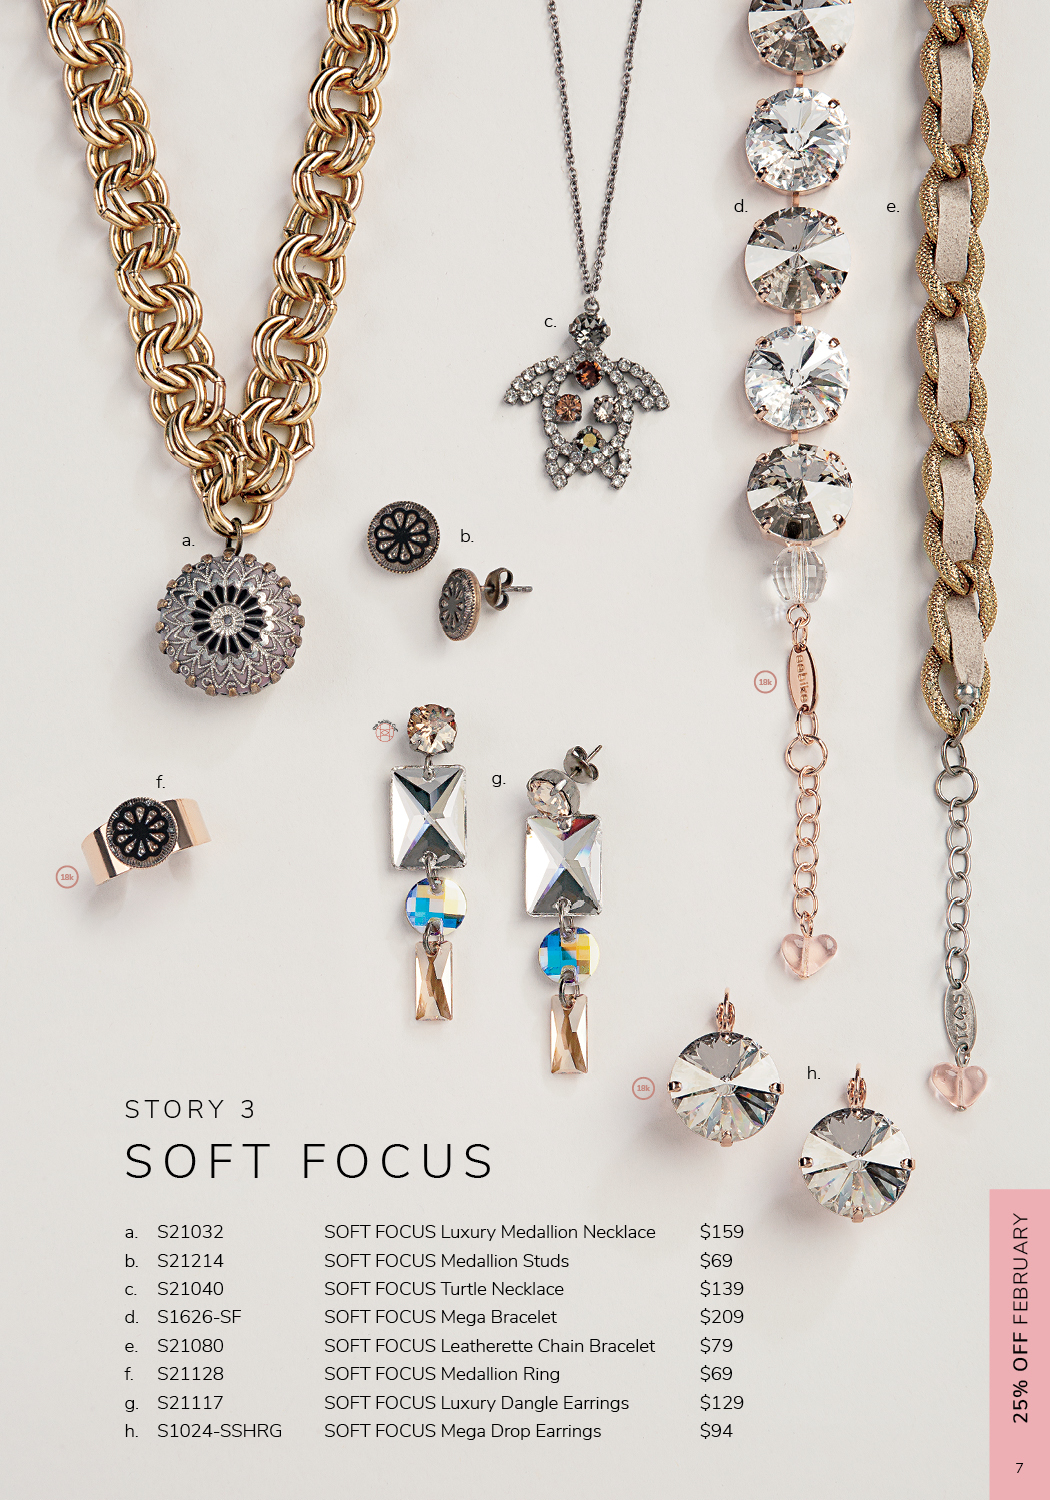 New Details about   SABIKA JEWELRY Spring/Summer 2014 Catalog Collectors item 